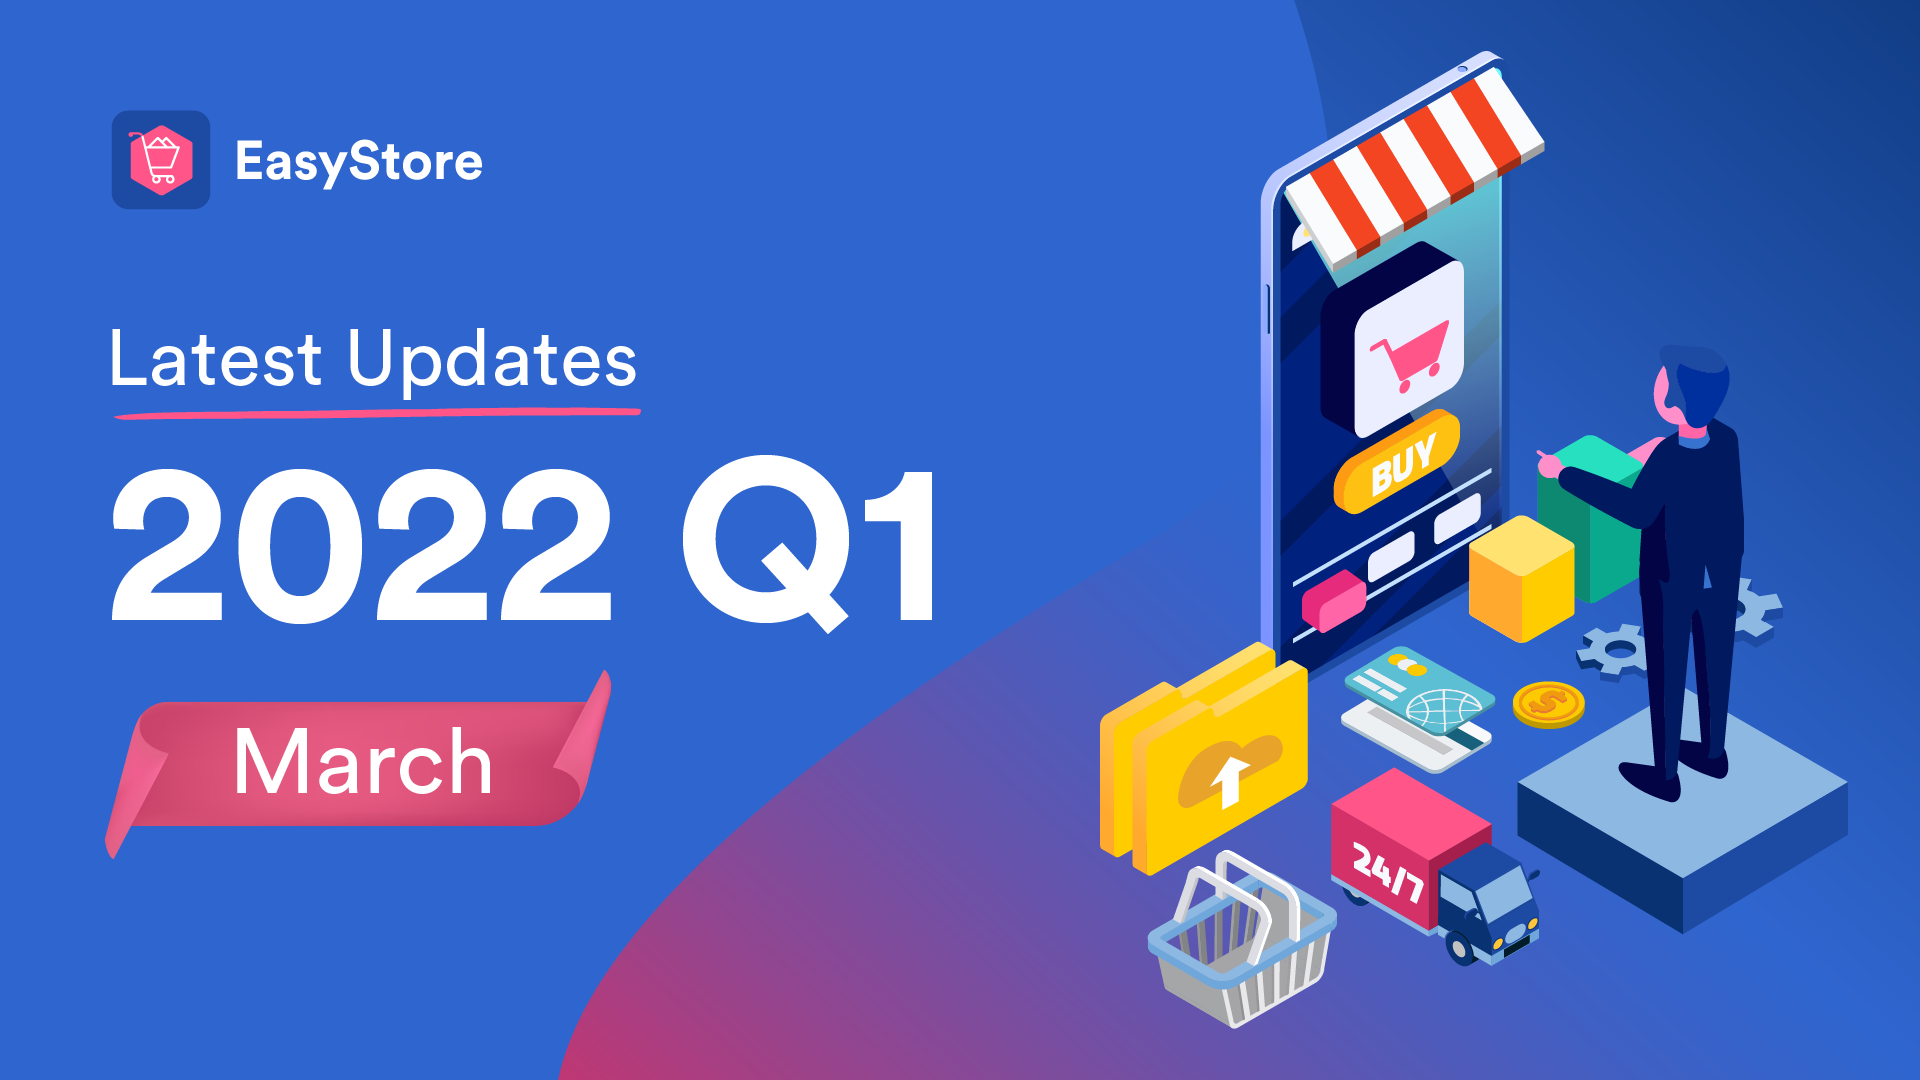 easystore-latest-updates-march-2022